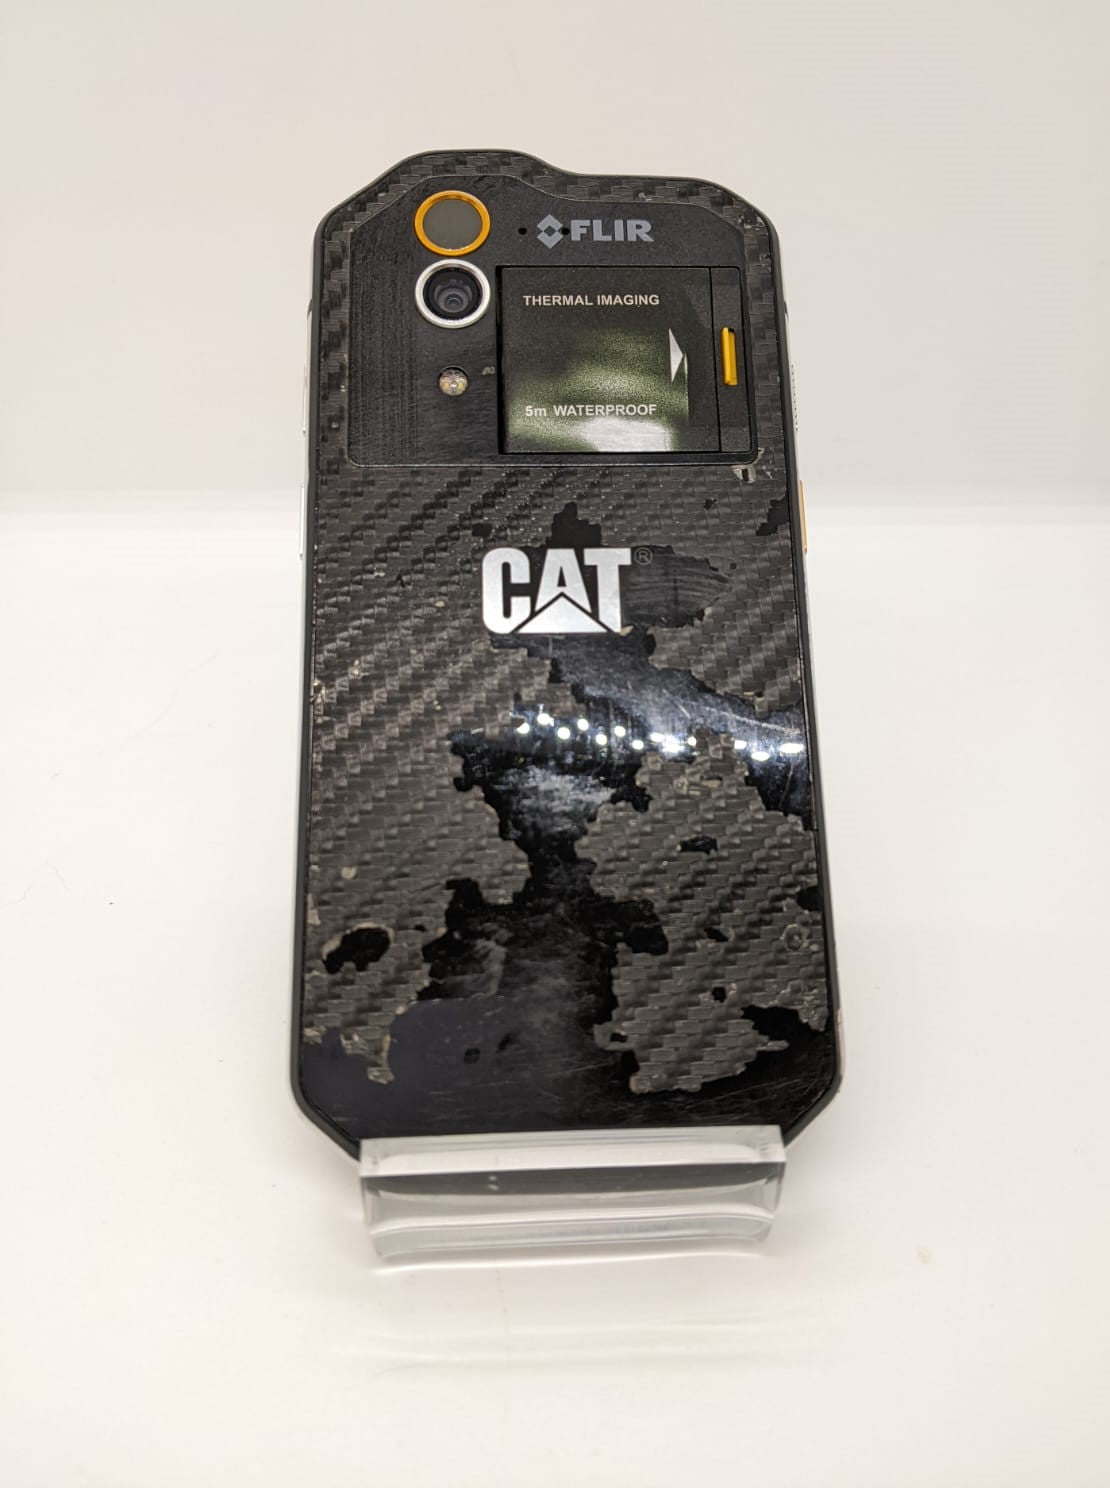 CAT S60 32GB Rugged Unlocked Smartphone w/ FLIR Thermal Imager Android 4G LTE